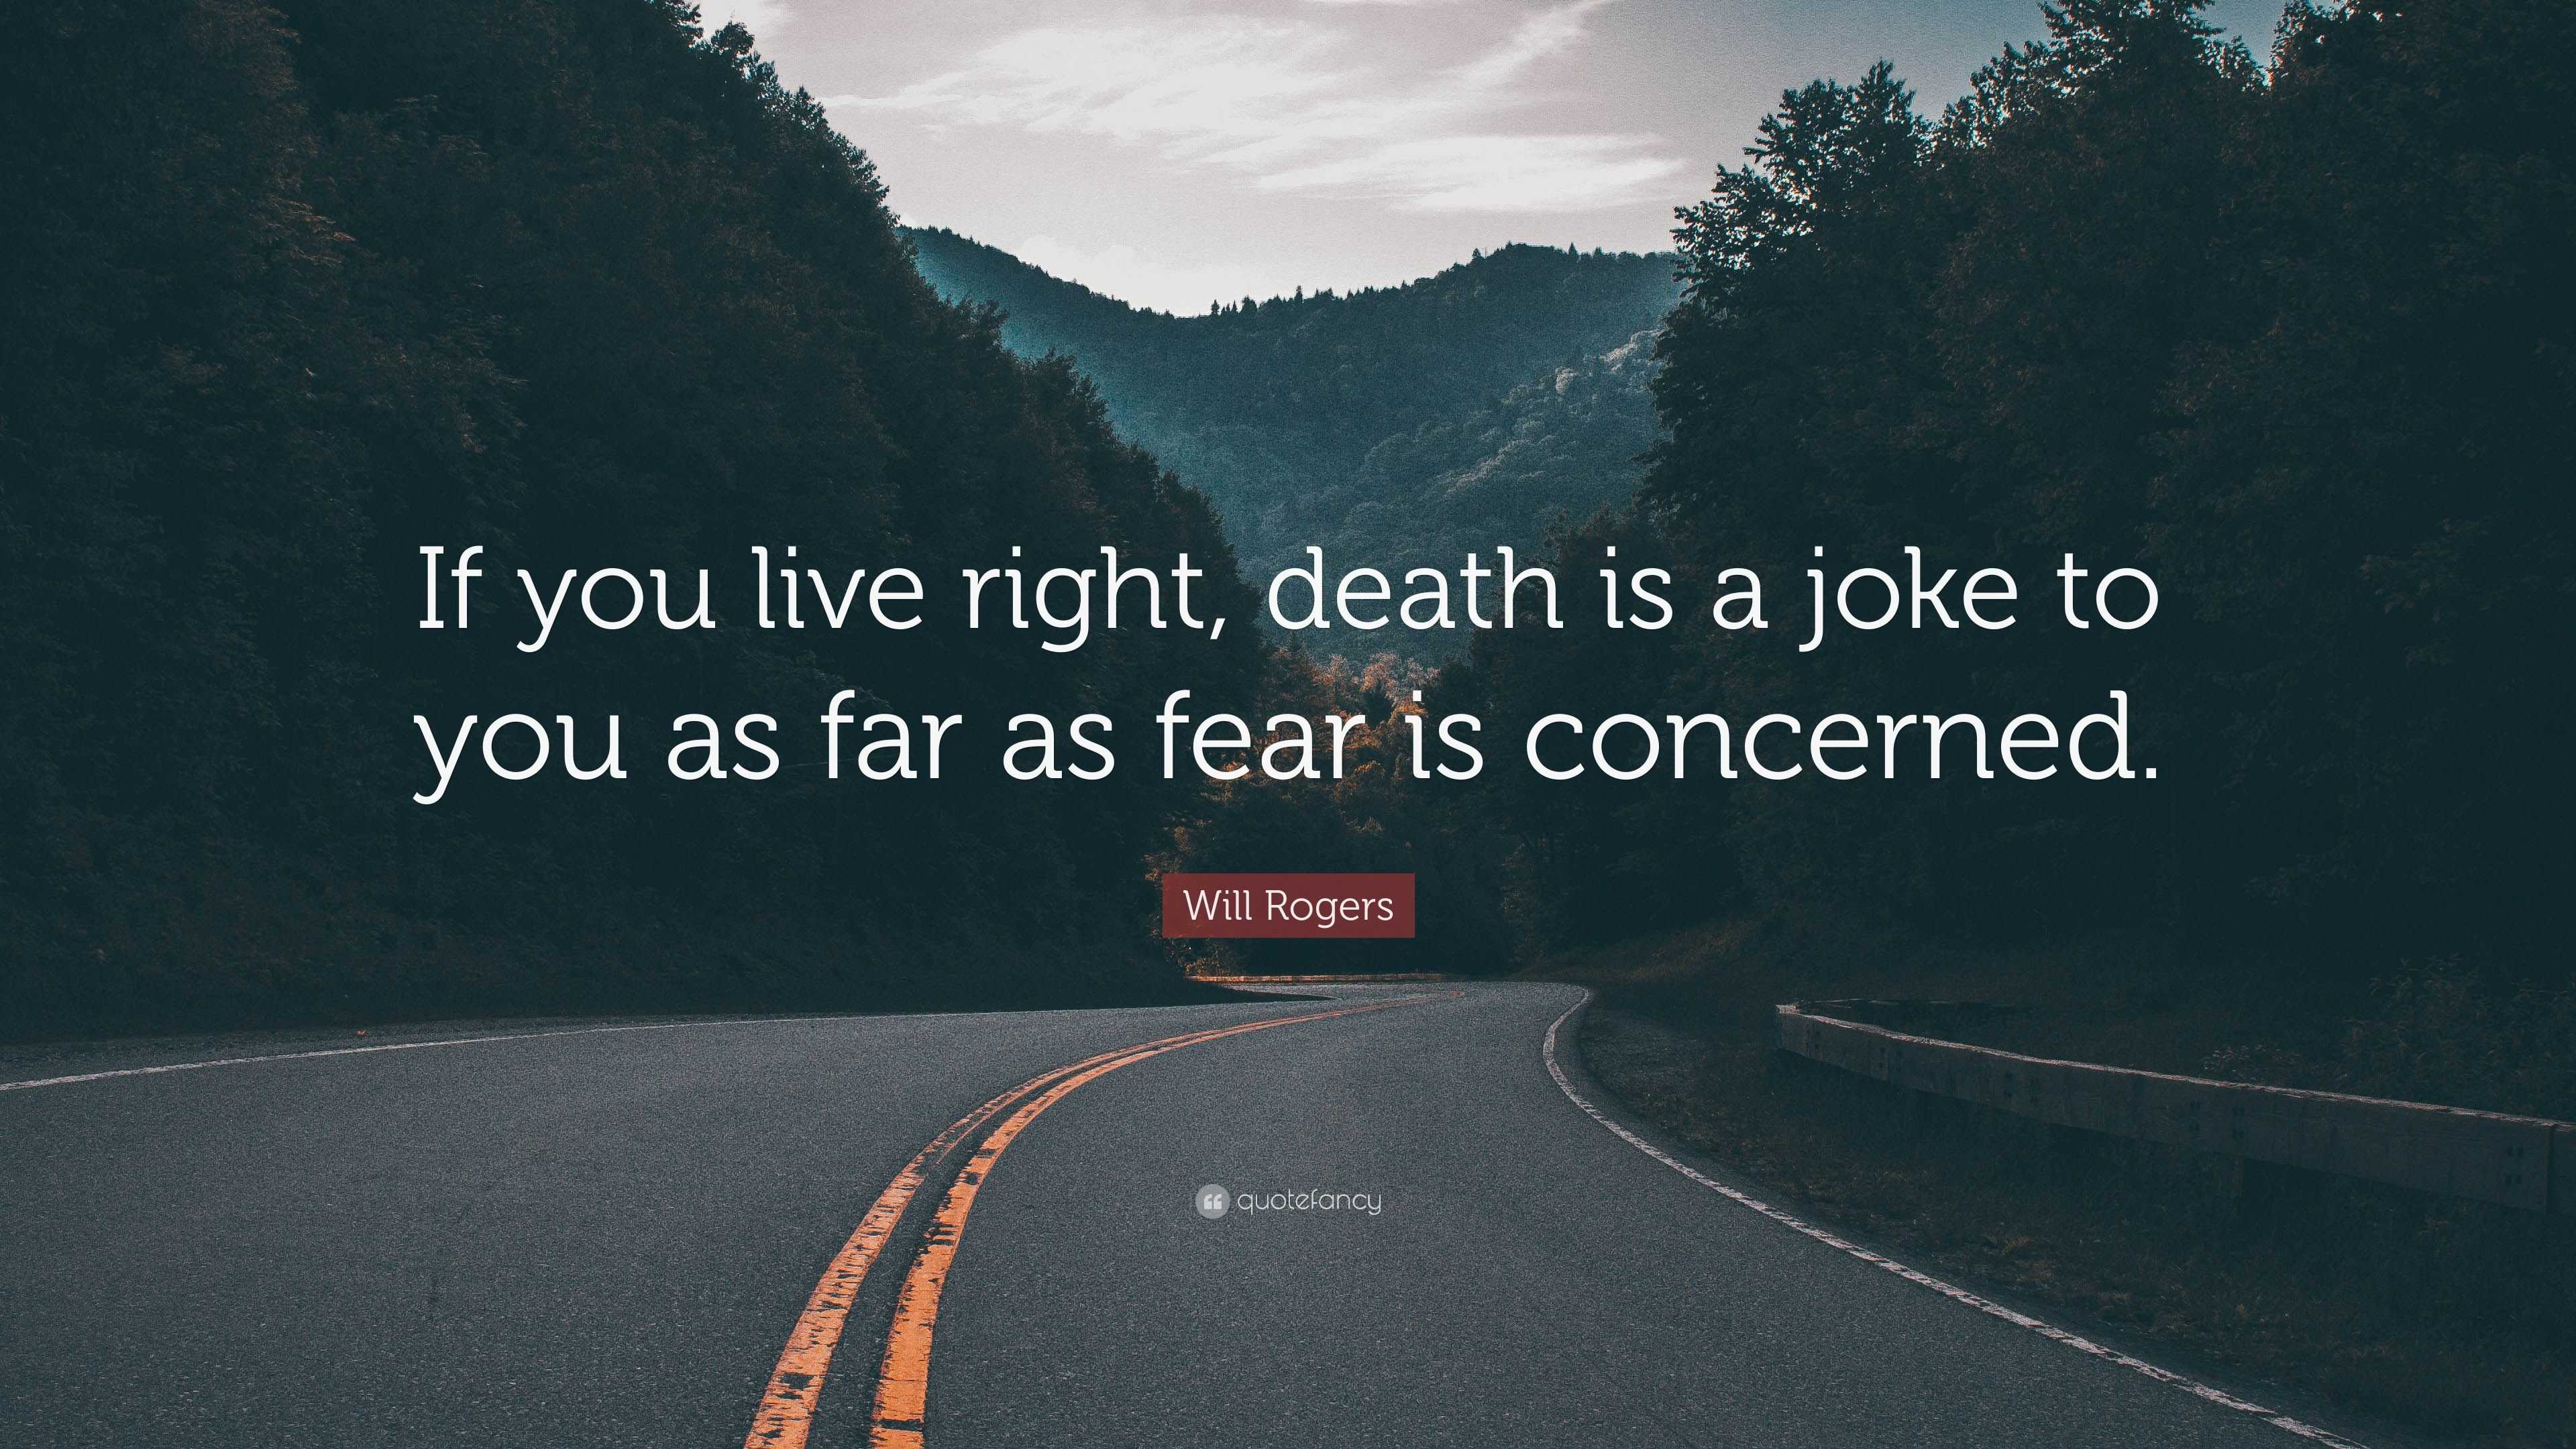 Will Rogers Quote: “If you live right, death is a joke to you as far as ...